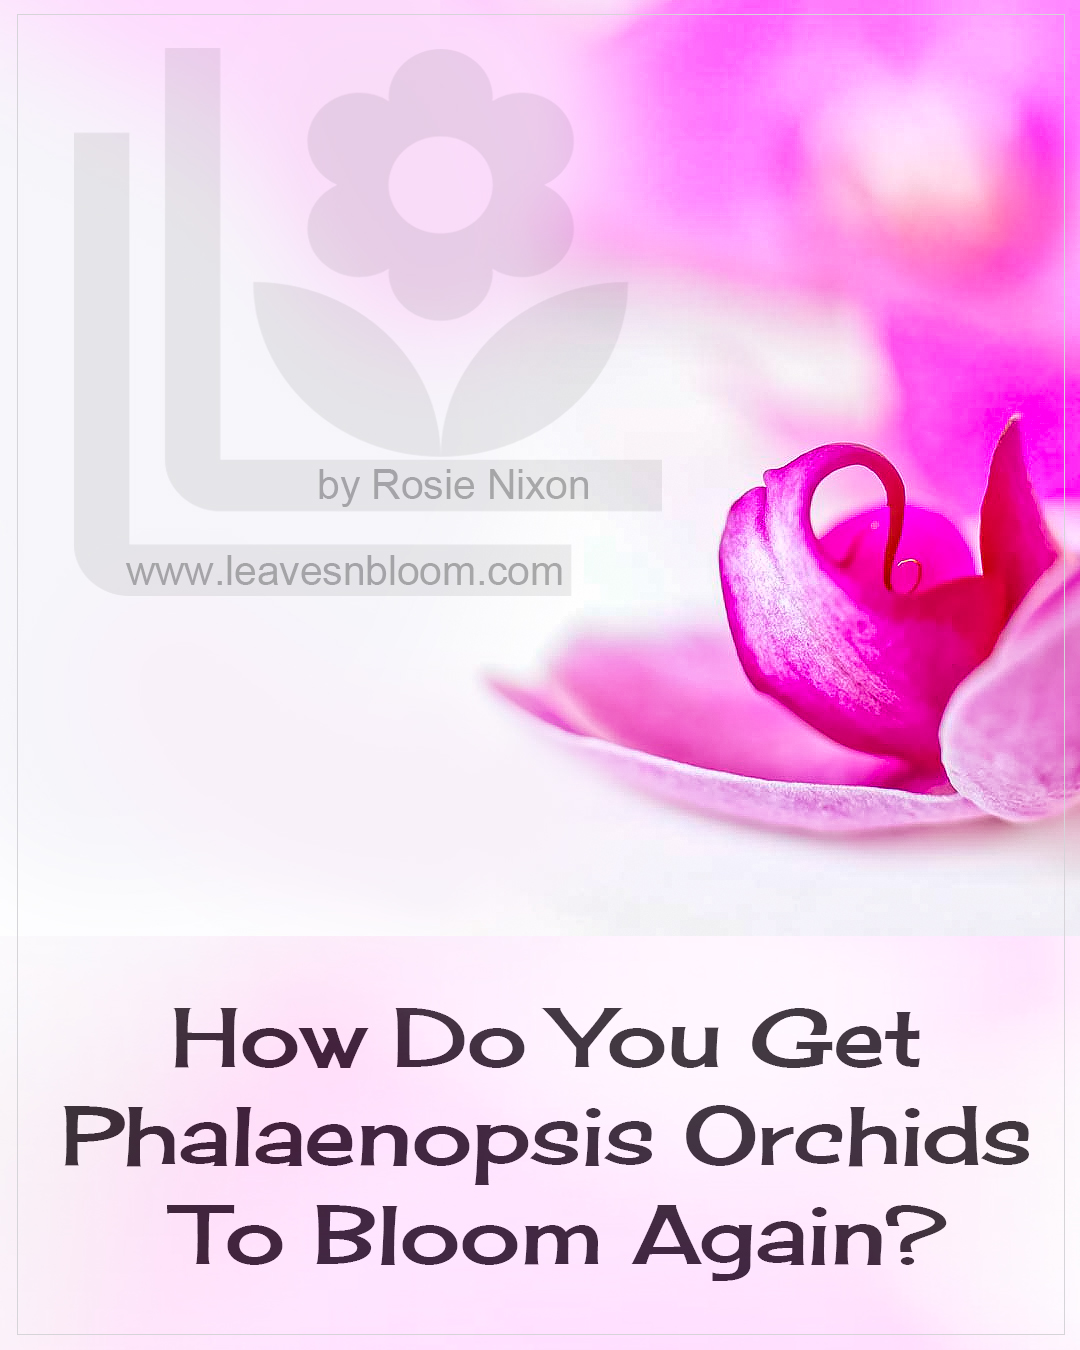 picture of a pink orchid flower and the text asks how do you get a phalaenopsis orchids to bloom again?